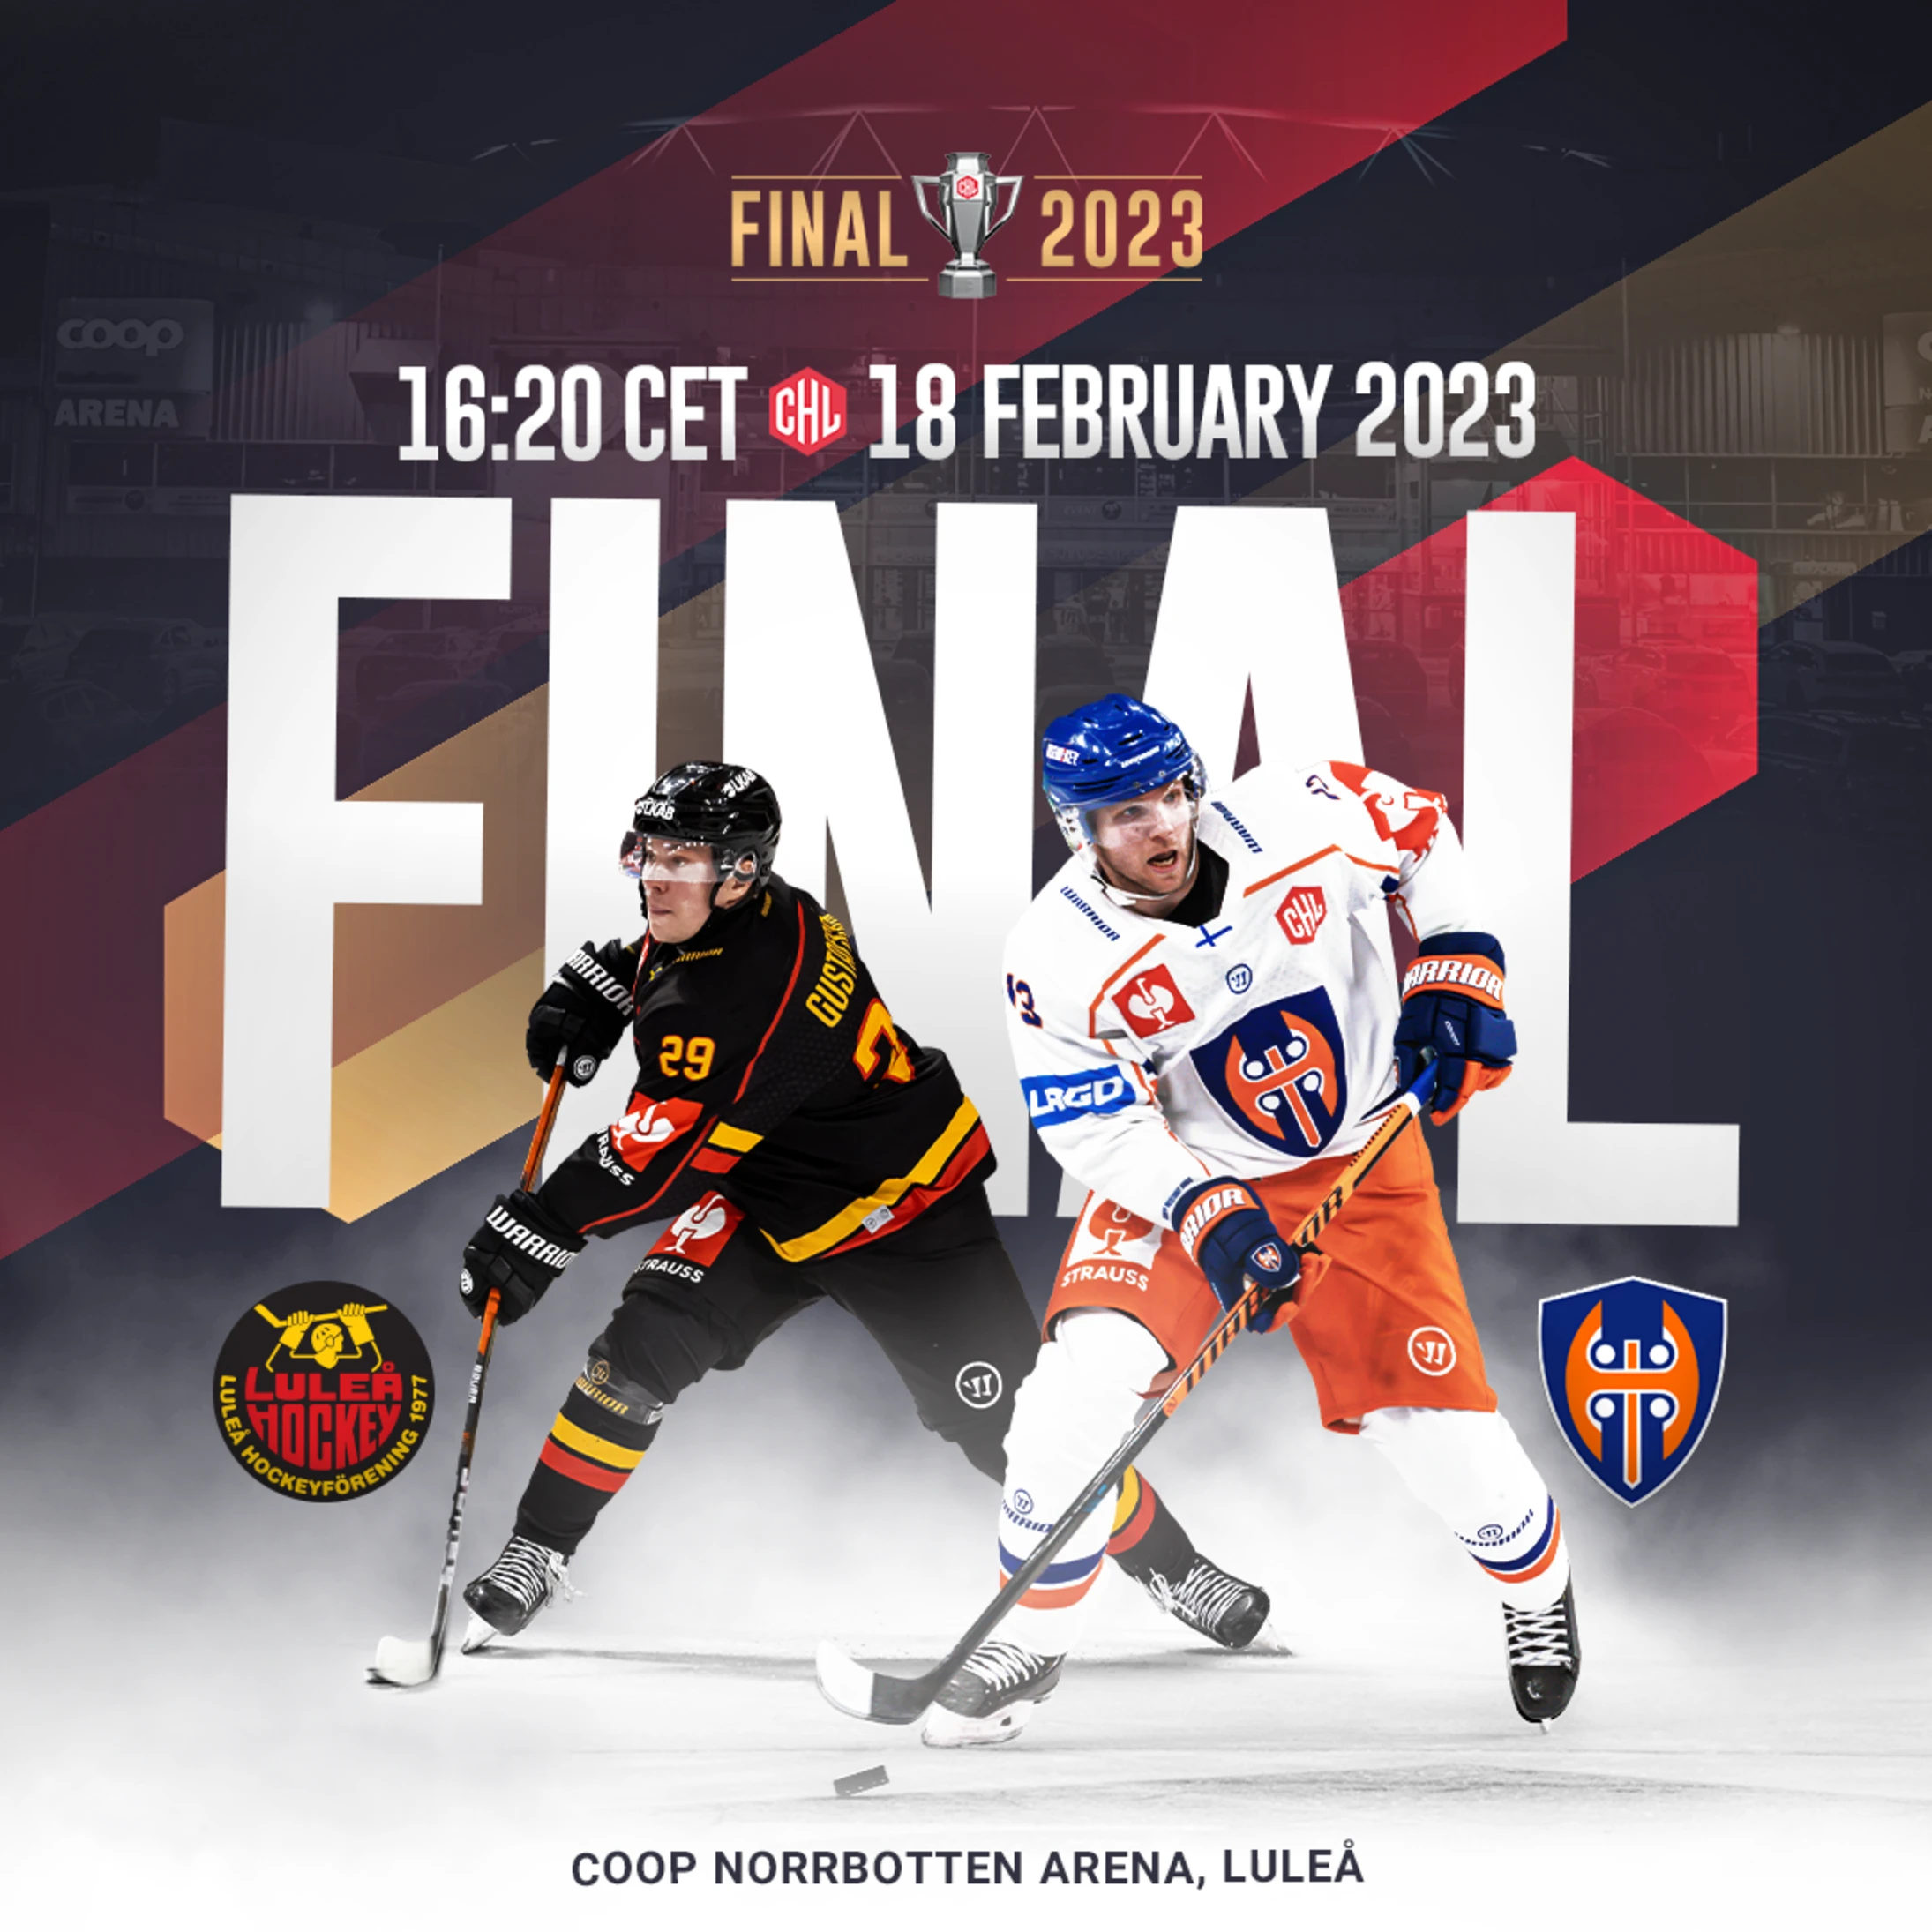 CHL Final 2023 face-off time set for 1620 CET!